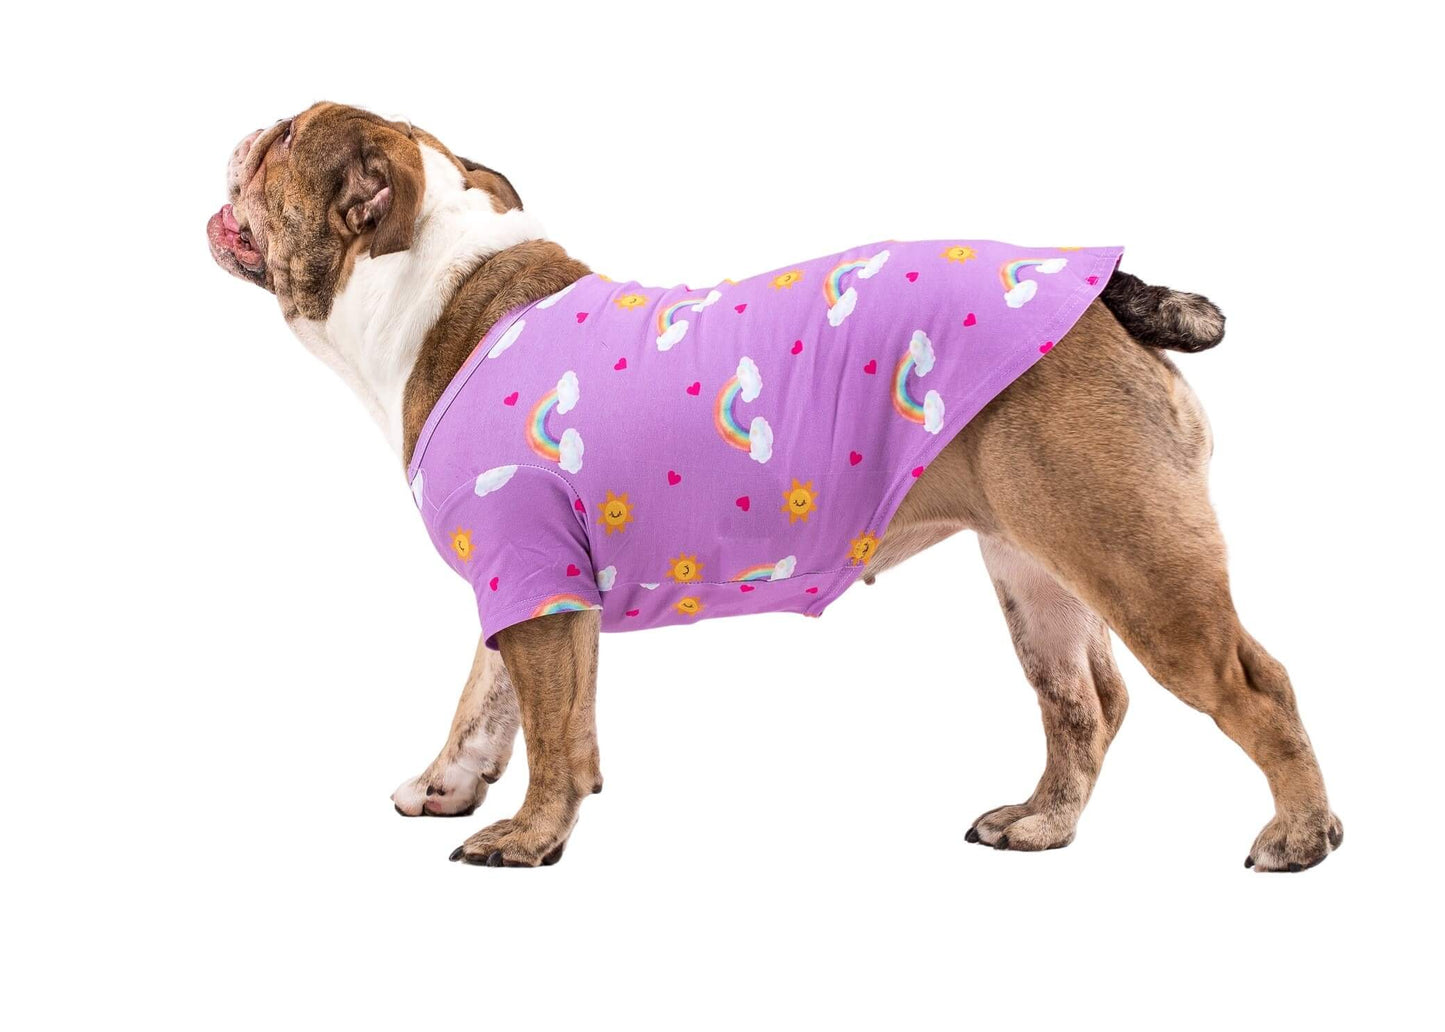 An English Bulldog standing side on wearing Vibrant Hound's Chasing Rainbow dog pyjama. The dog shirt is purple with rainbows, bright suns, and love hearts printed on it.